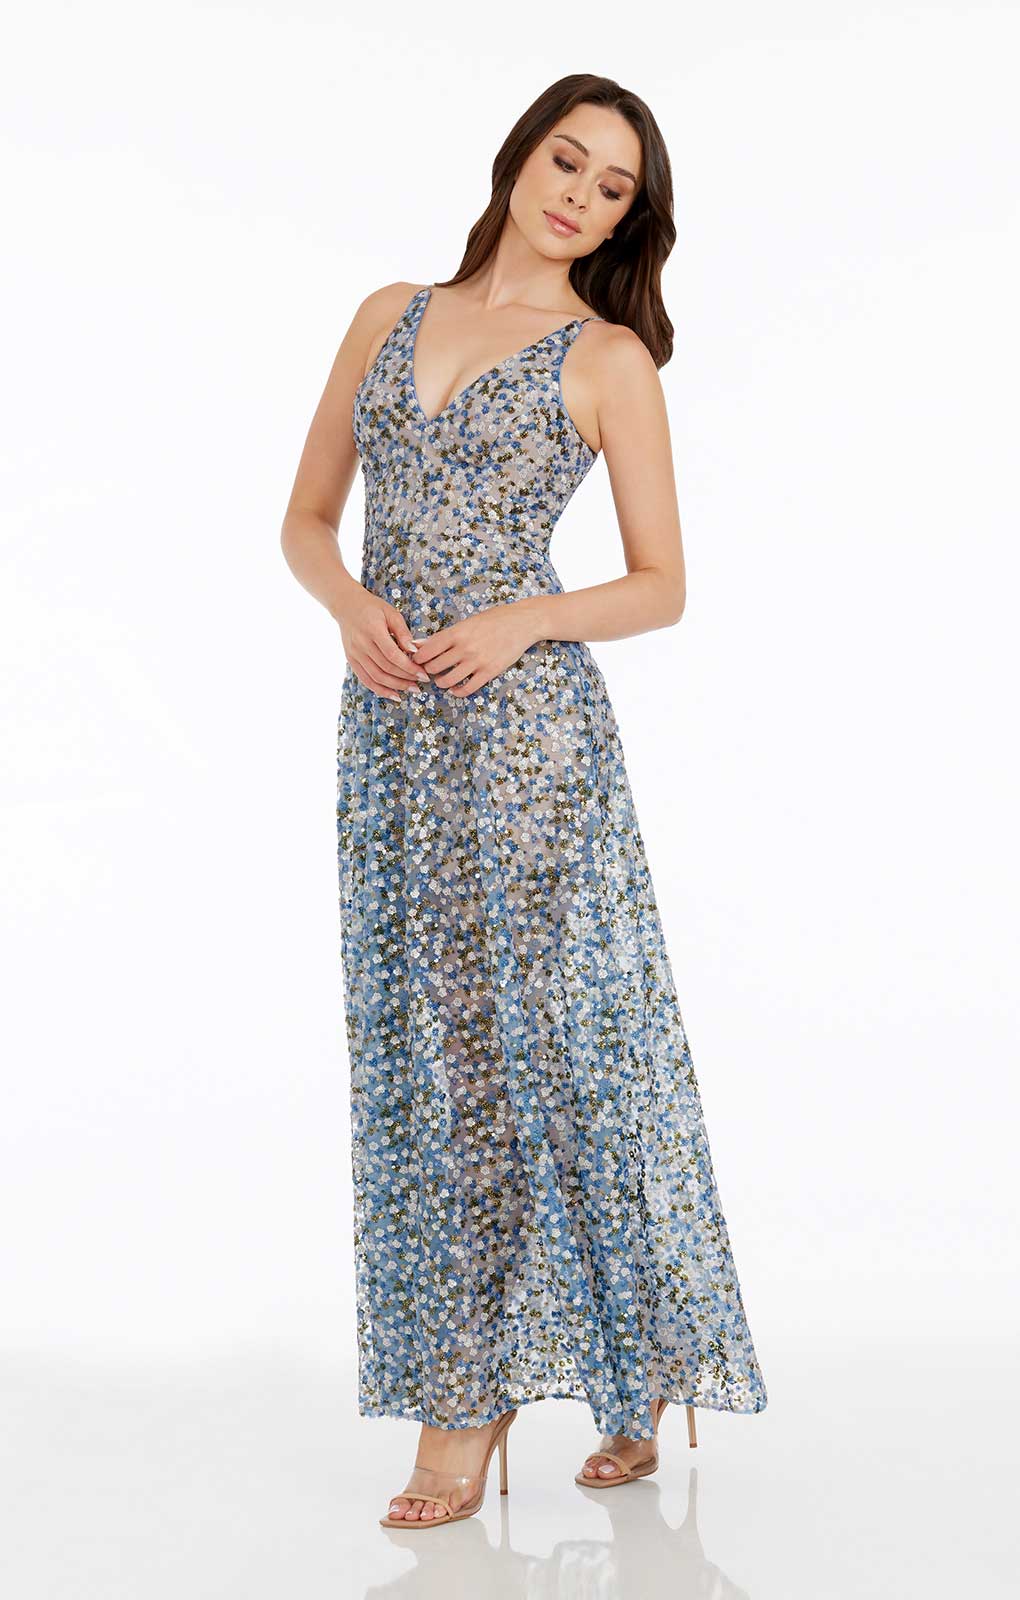 Dress The Population Ariyah Mineral Blue Floral Maxi Dress product image